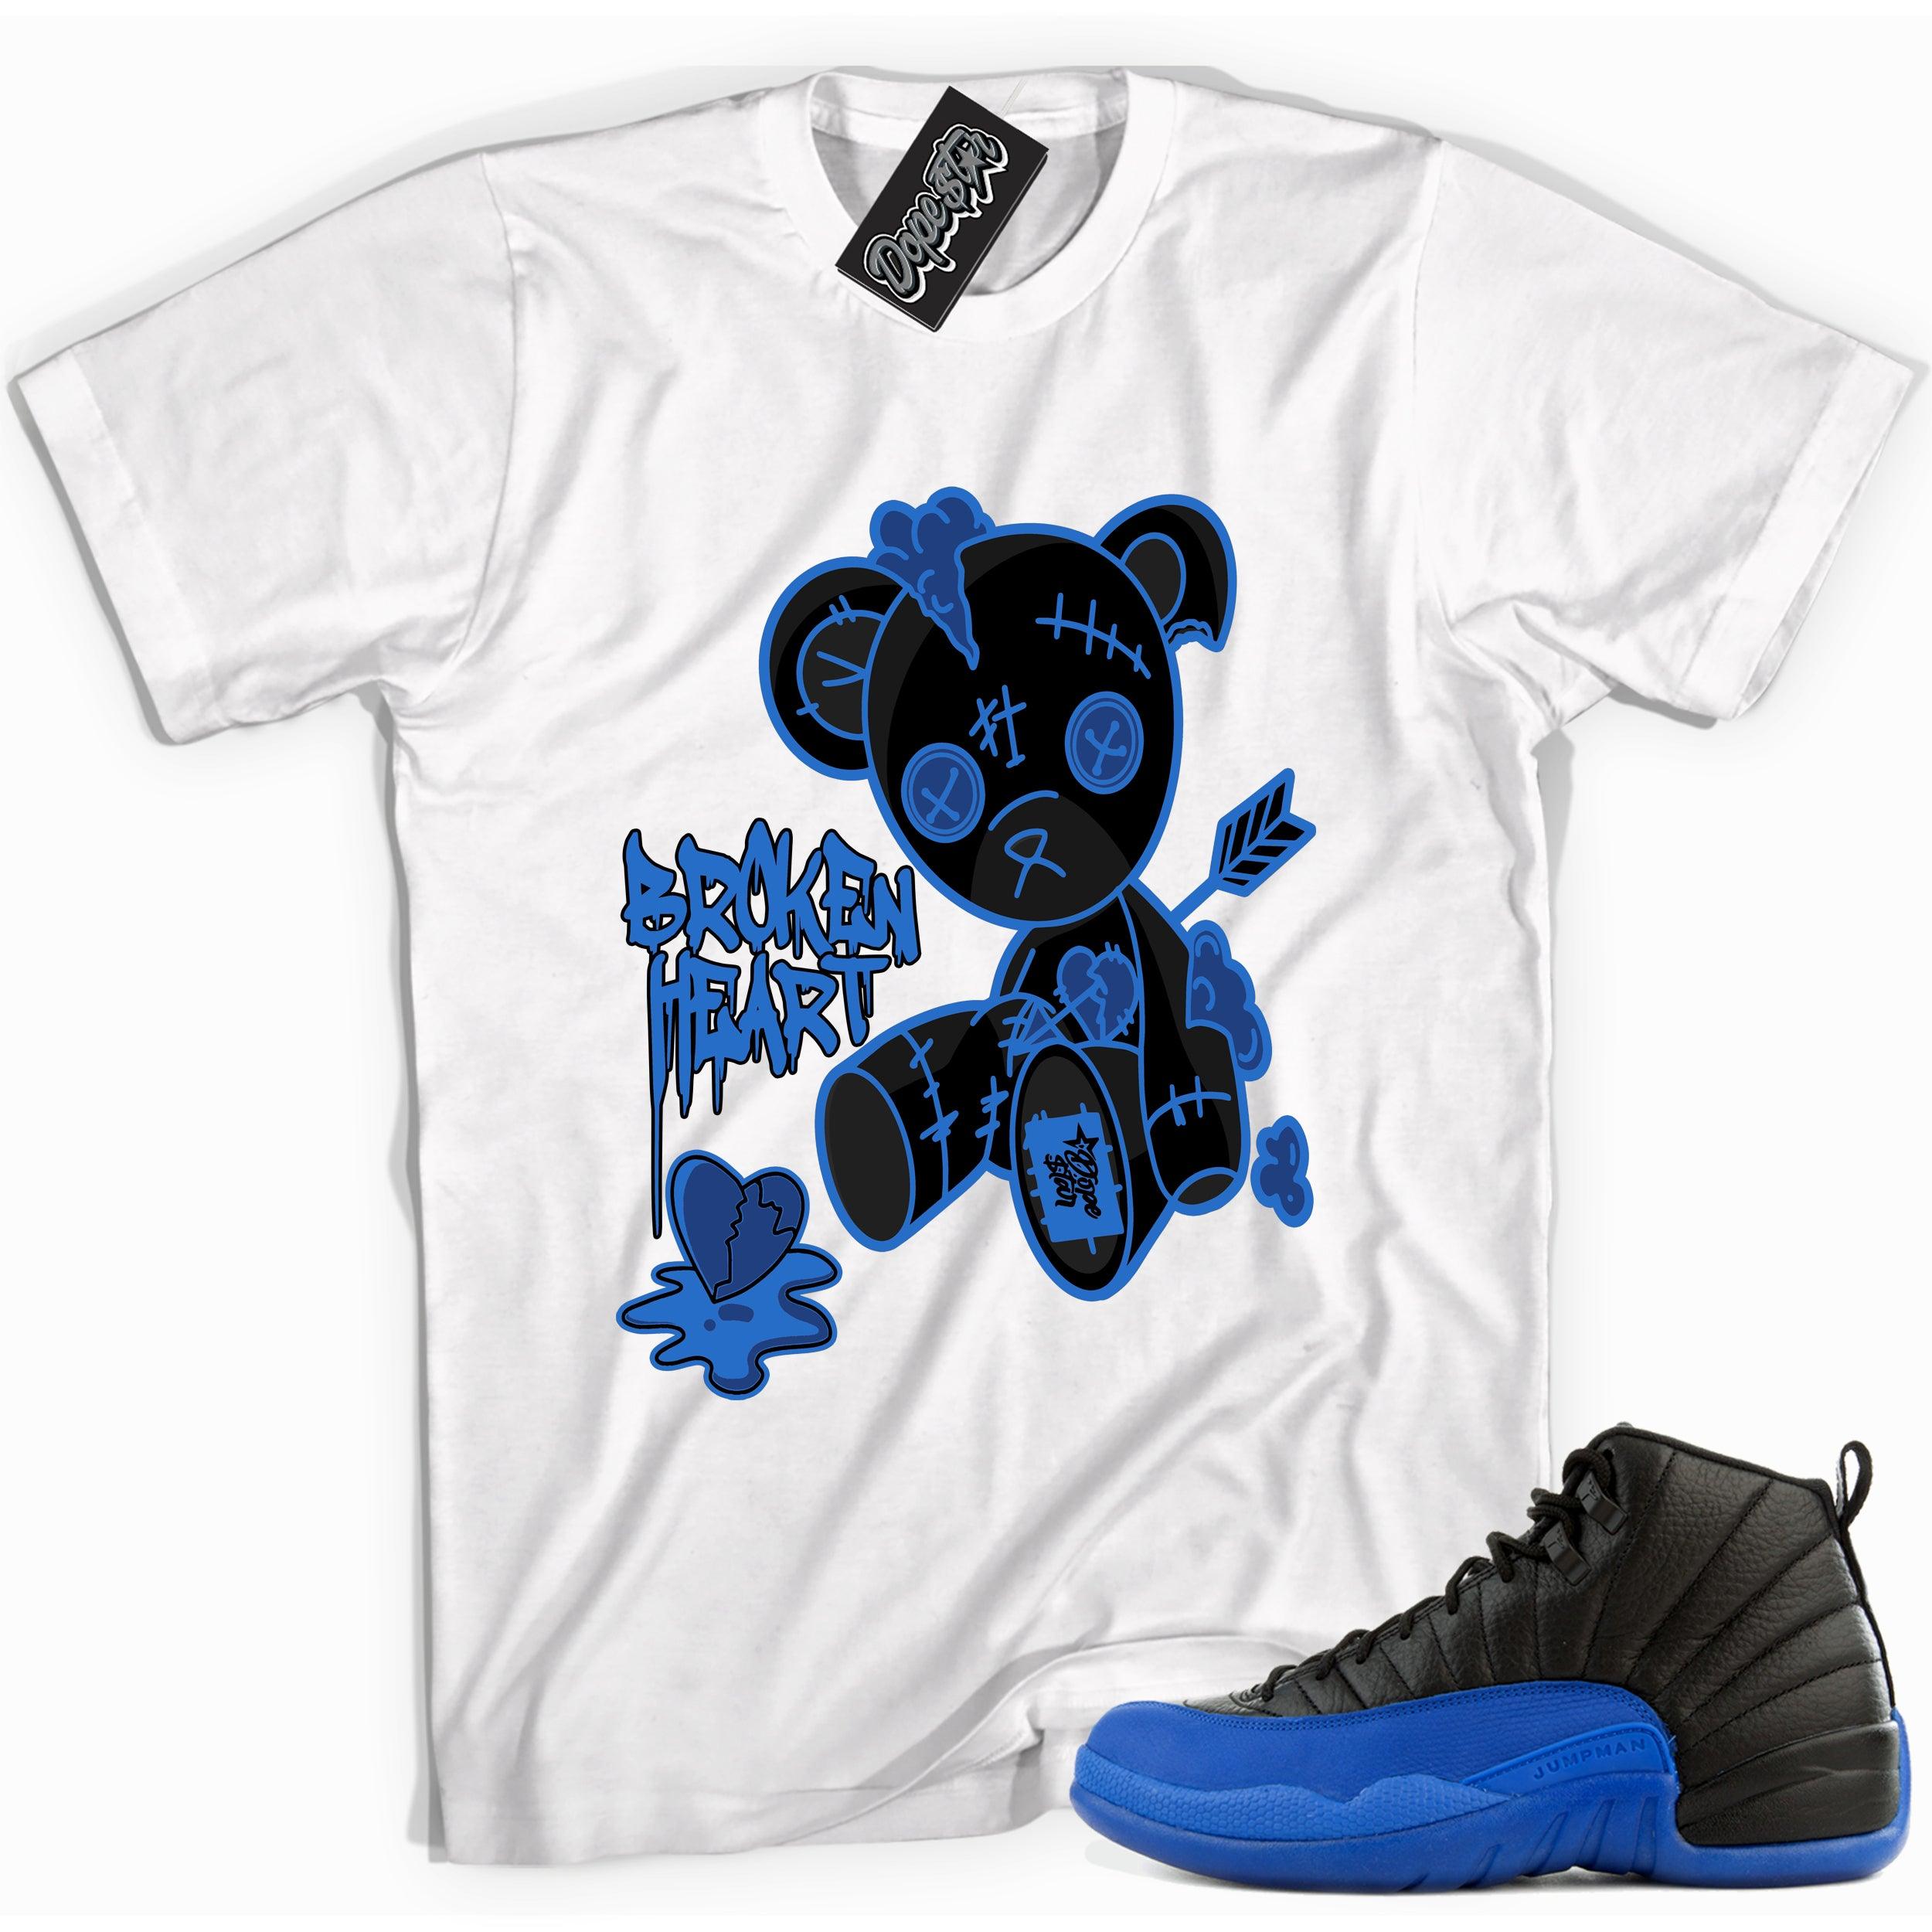 Cool white graphic tee with 'broken heart bear' print, that perfectly matches Air Jordan 12 Retro Black Game Royal sneakers.